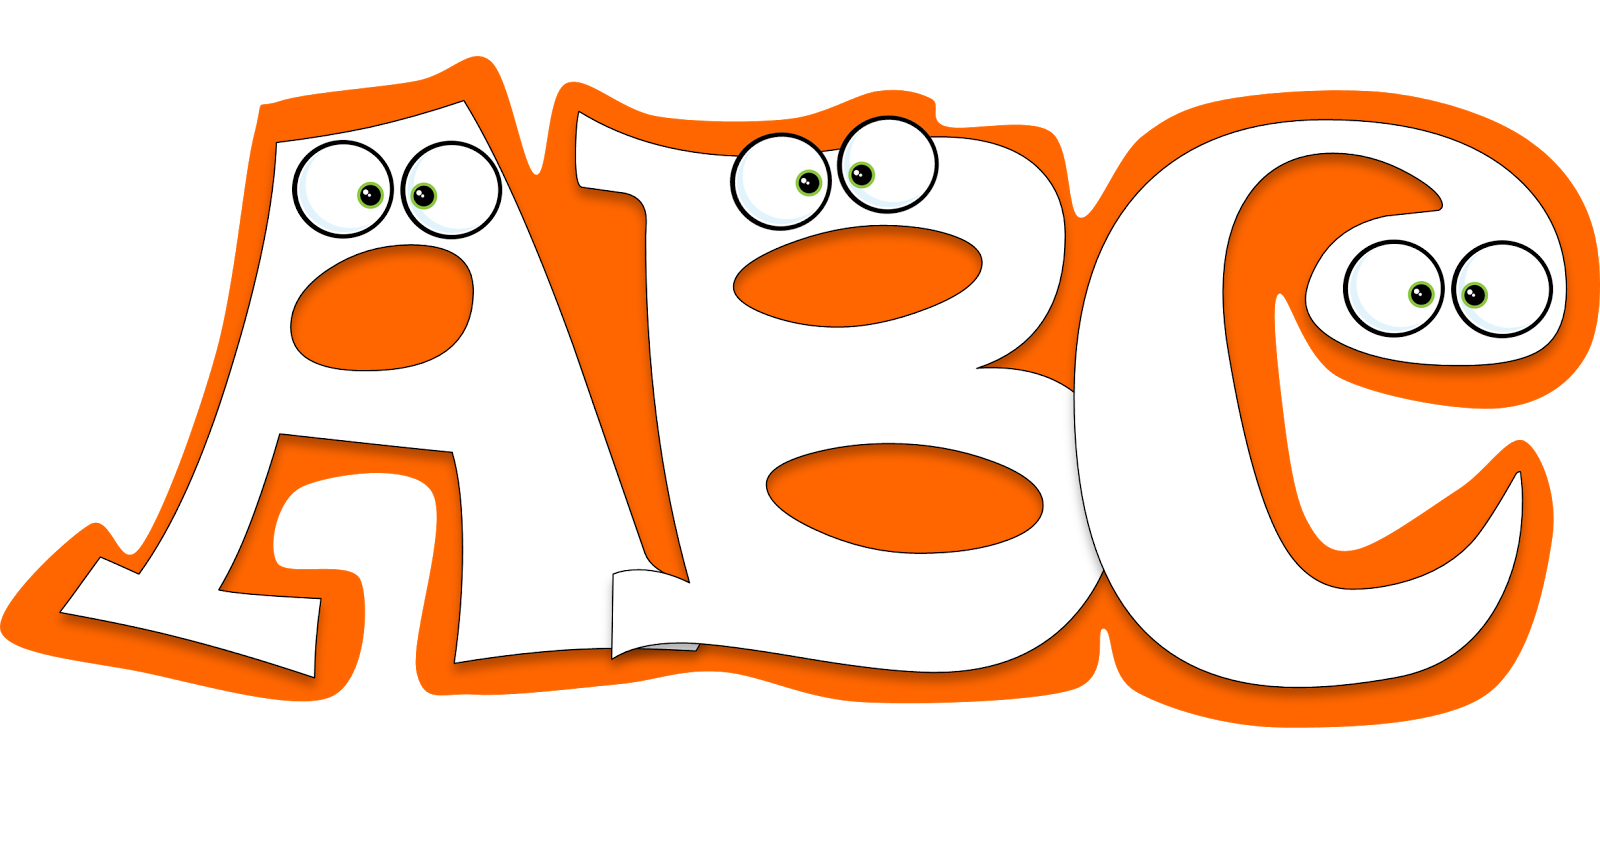 Abc Free1 Club Image Free Download Png Clipart